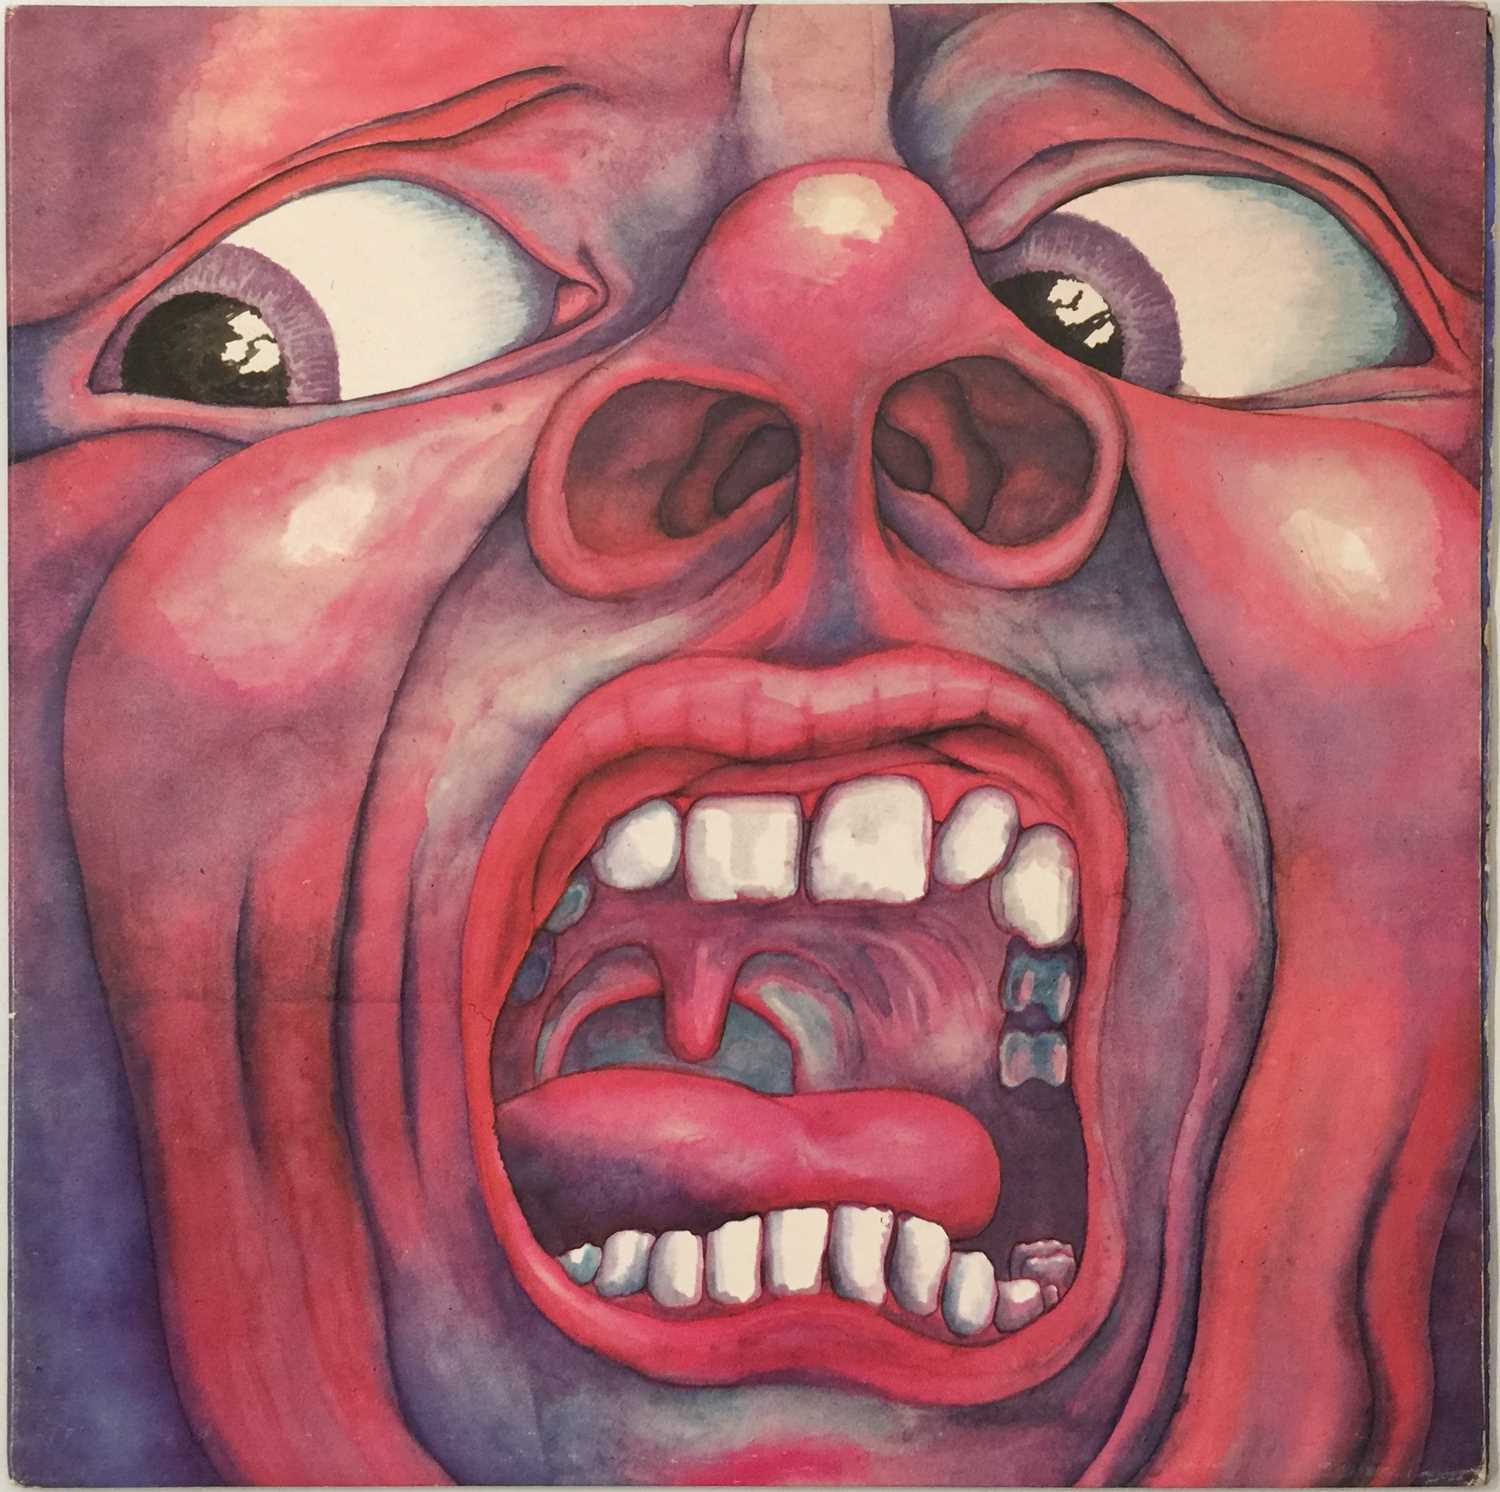 KING CRIMSON - IN THE COURT OF THE CRIMSON KING LP (ORIGINAL ISLAND - ILPS-9111 A2/B4) - Image 2 of 6